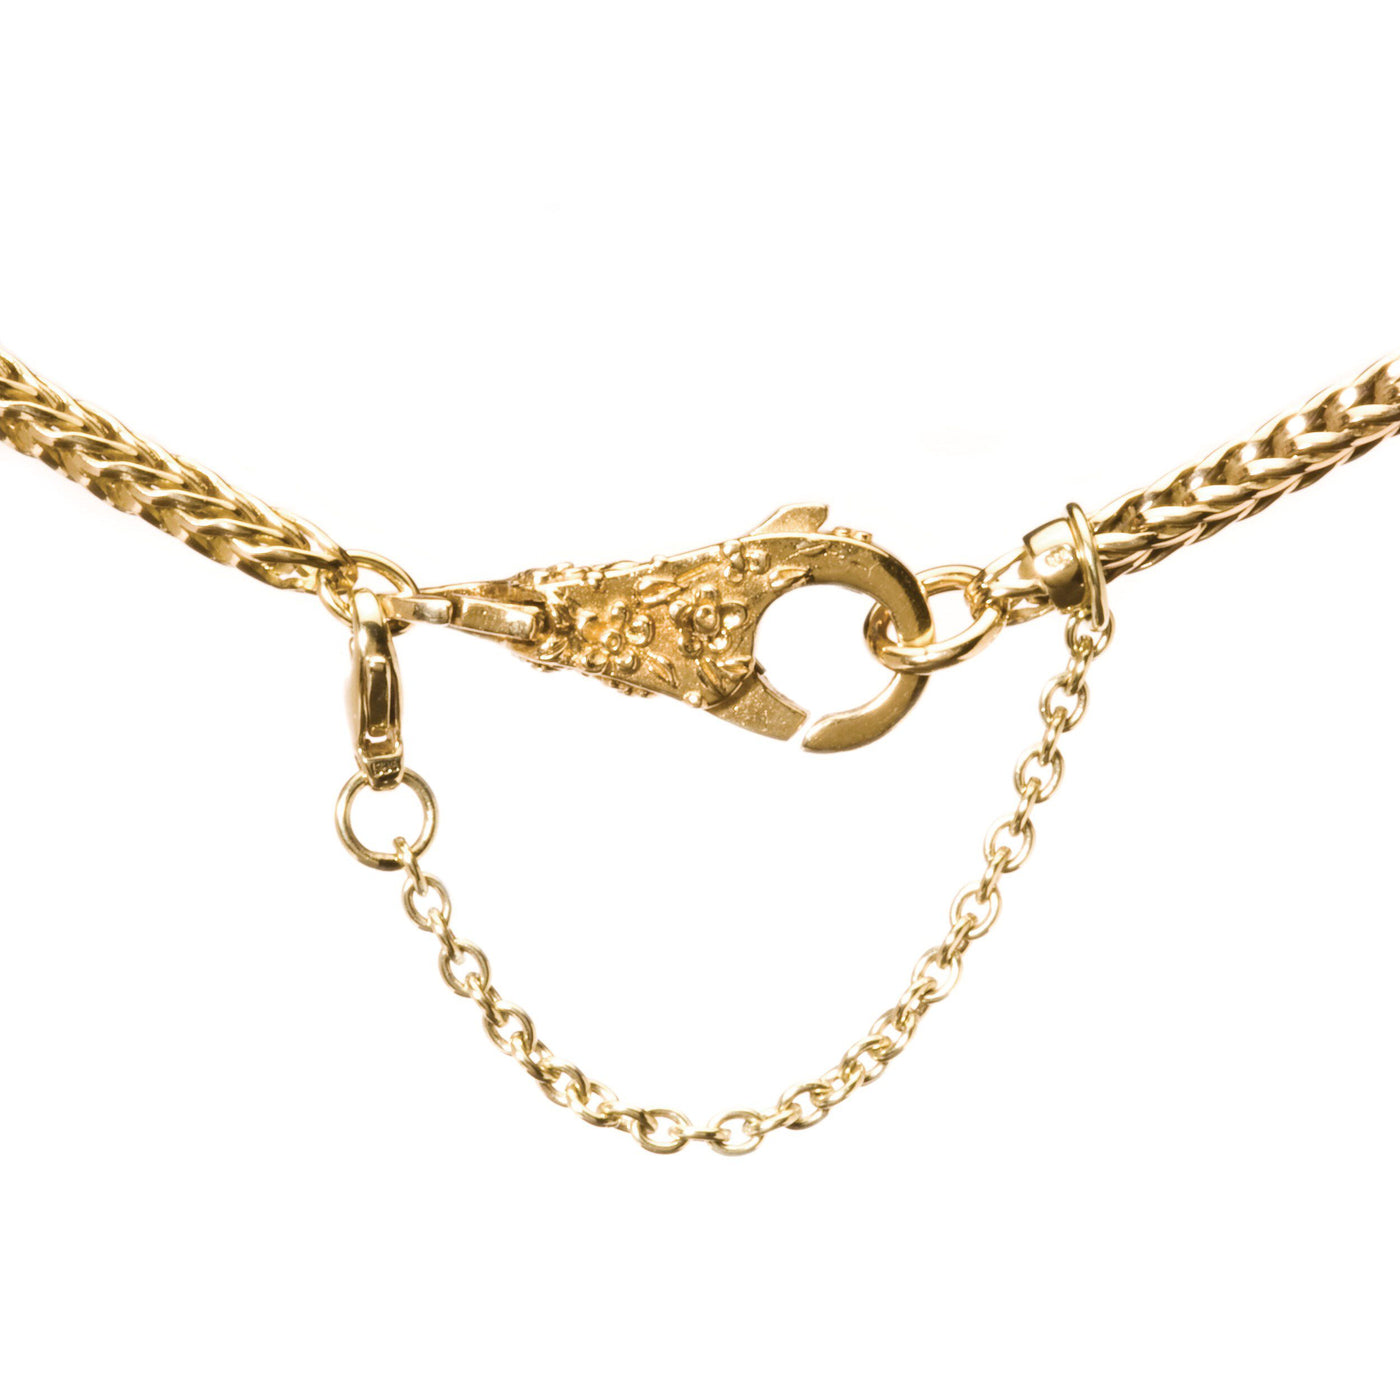 Safety Chain, Gold - Trollbeads Canada